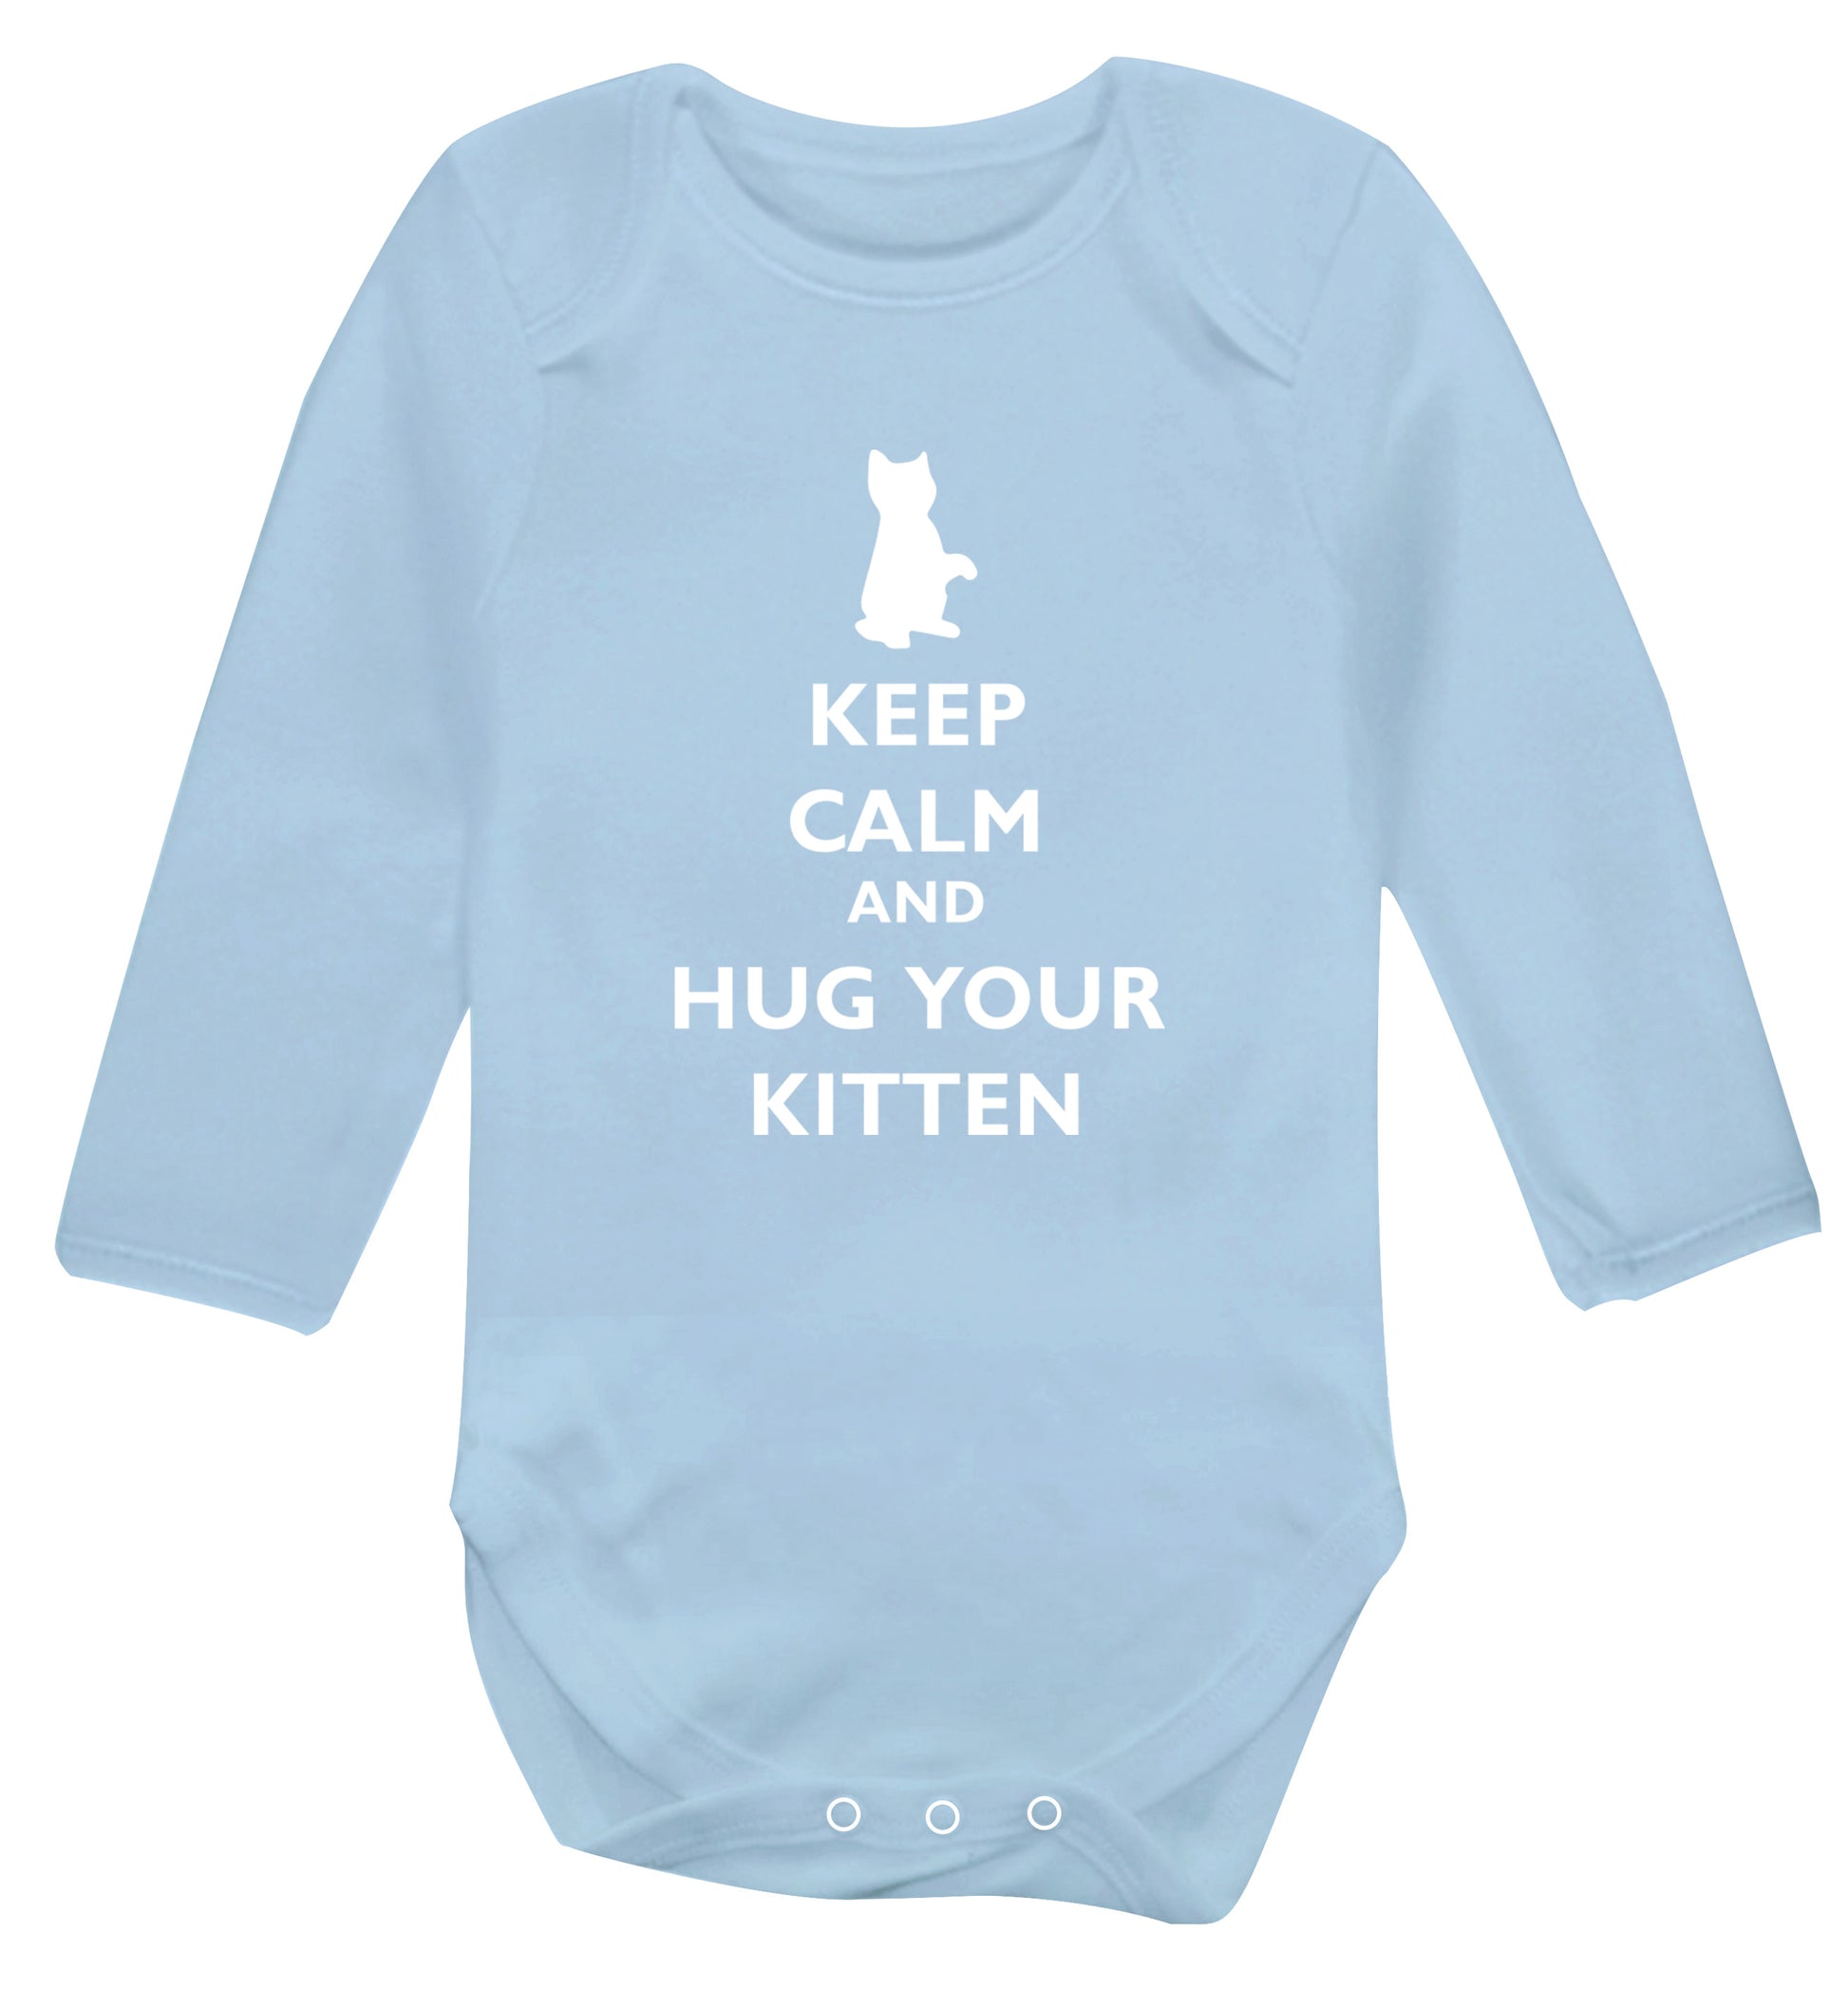 Keep calm and hug your kitten Baby Vest long sleeved pale blue 6-12 months